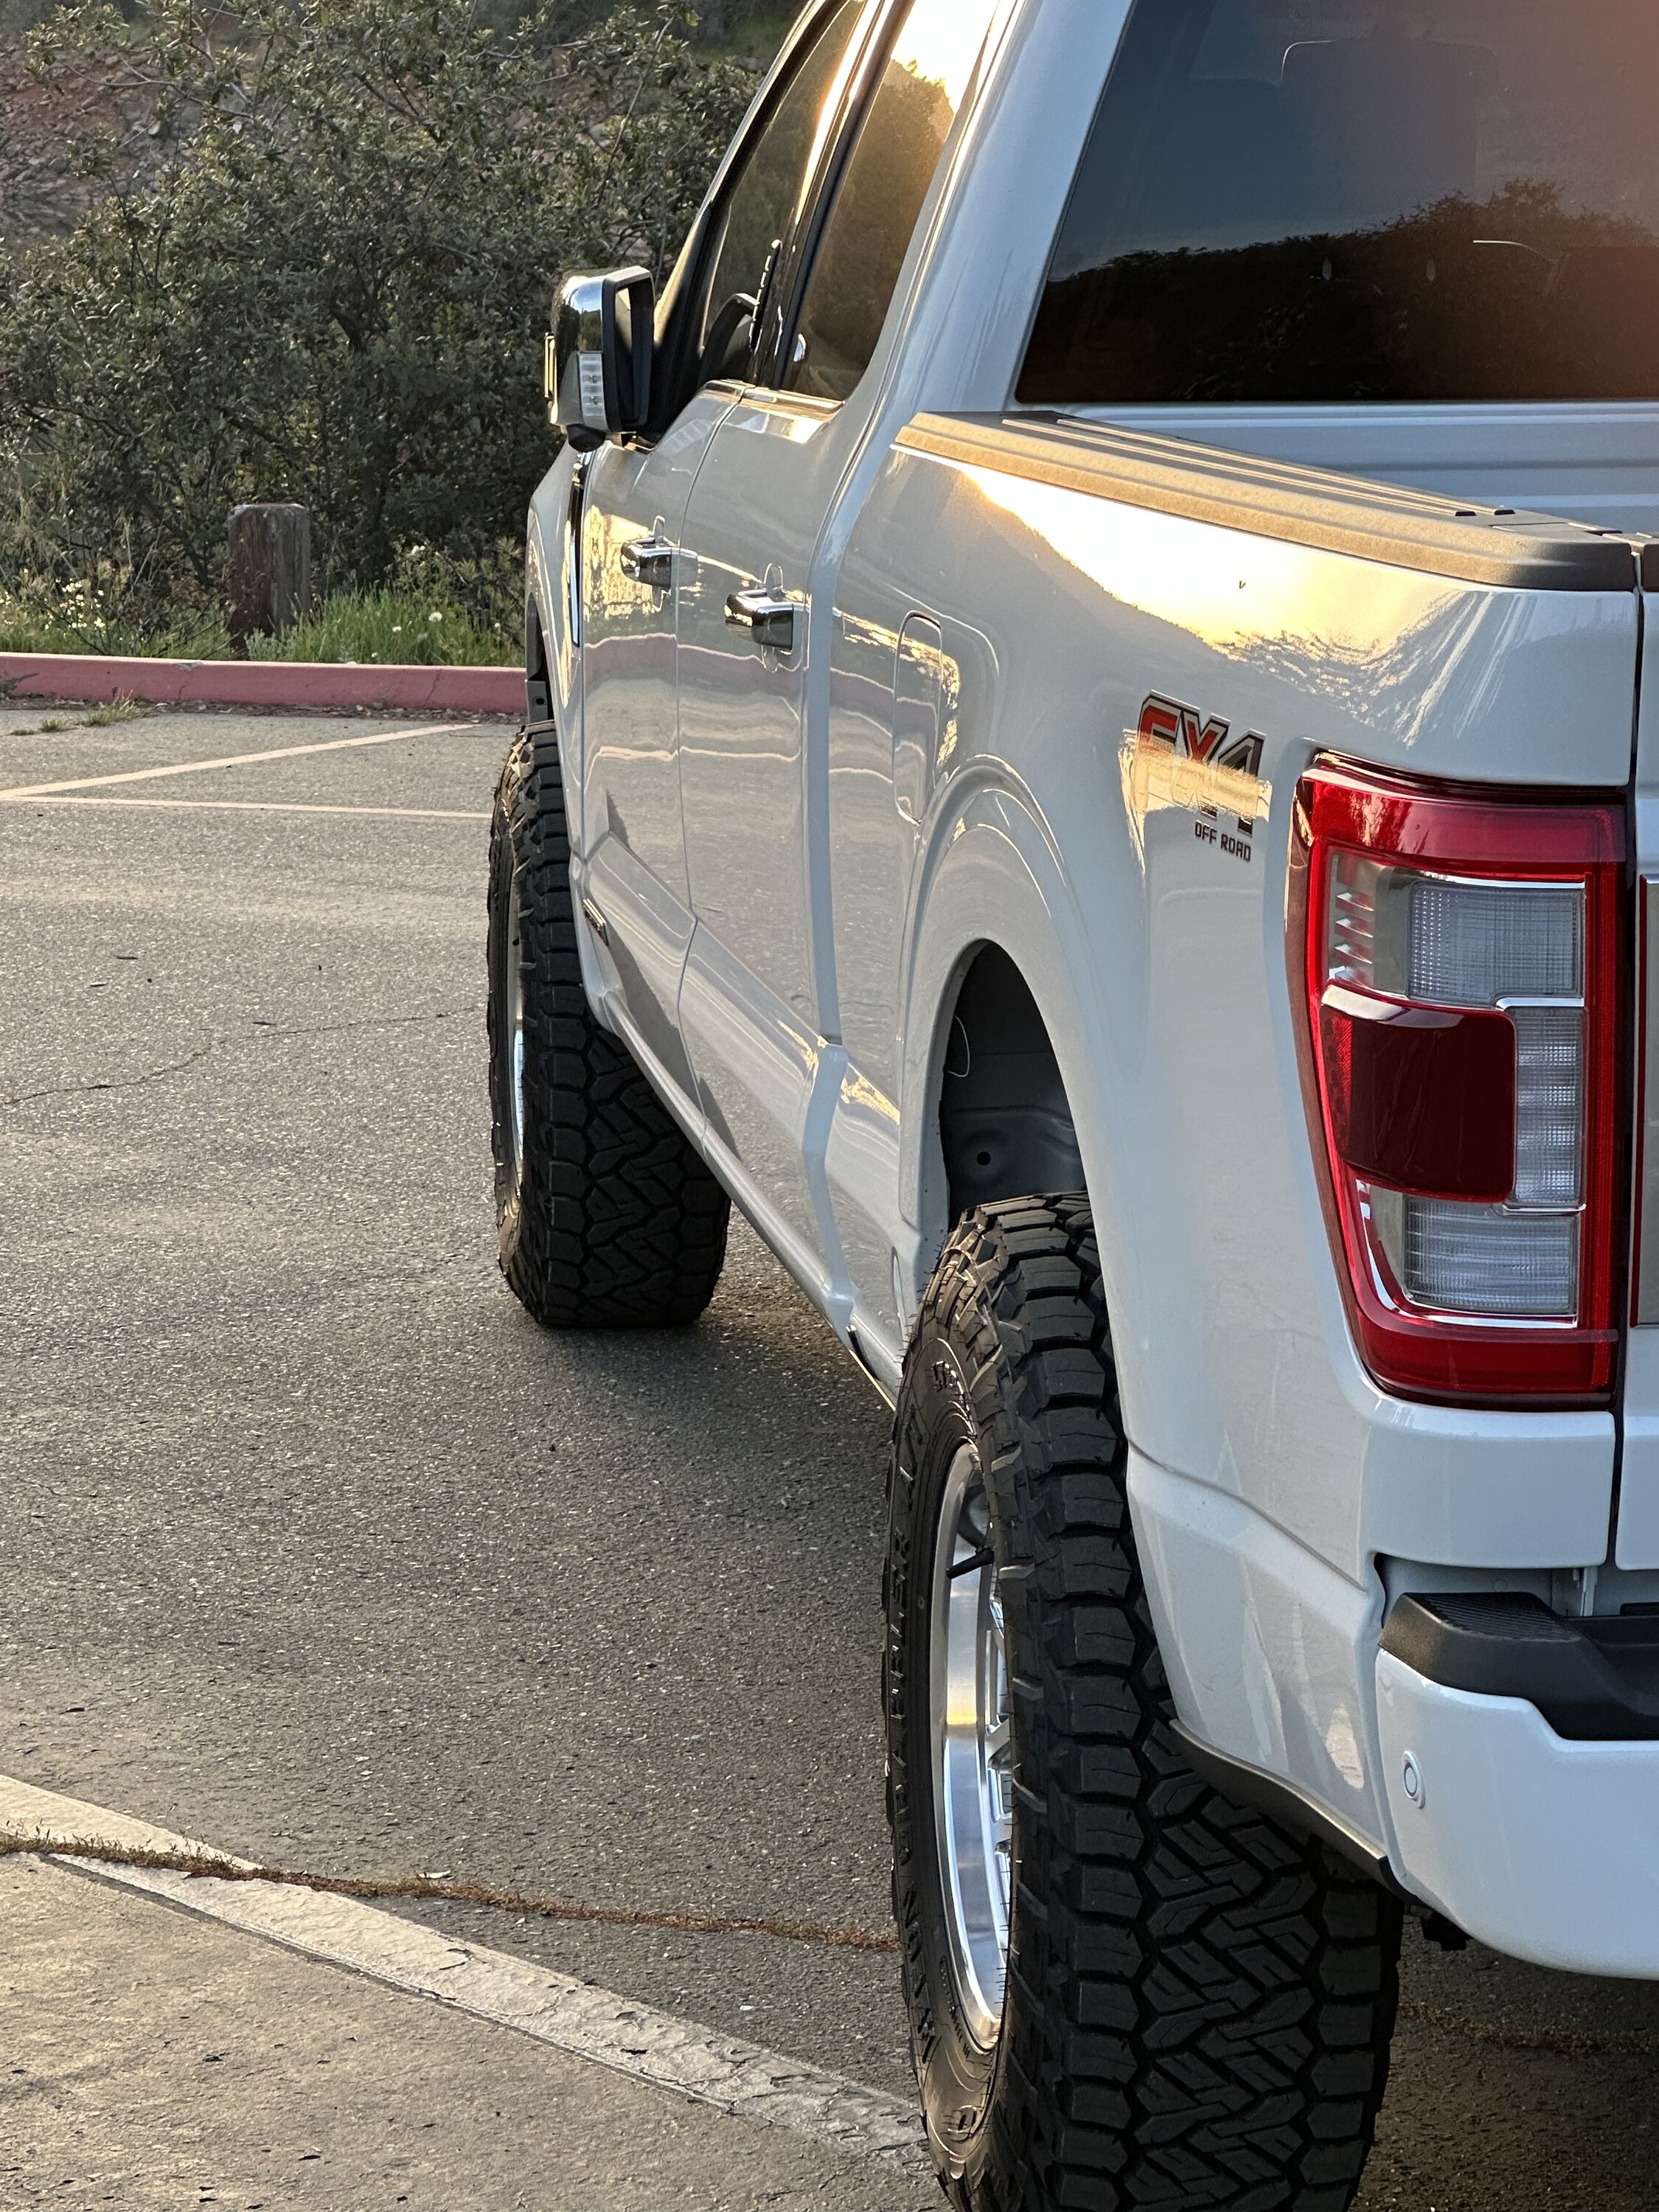 Ford F-150 ‘23 Platinum PowerBoost F-150 with: KMC446 wheels, Nitto Recon Grapplers. Ford Performance (Bilstein) Leveling Kit 9E71FCF3-E275-4600-86FC-E87DF079A75E